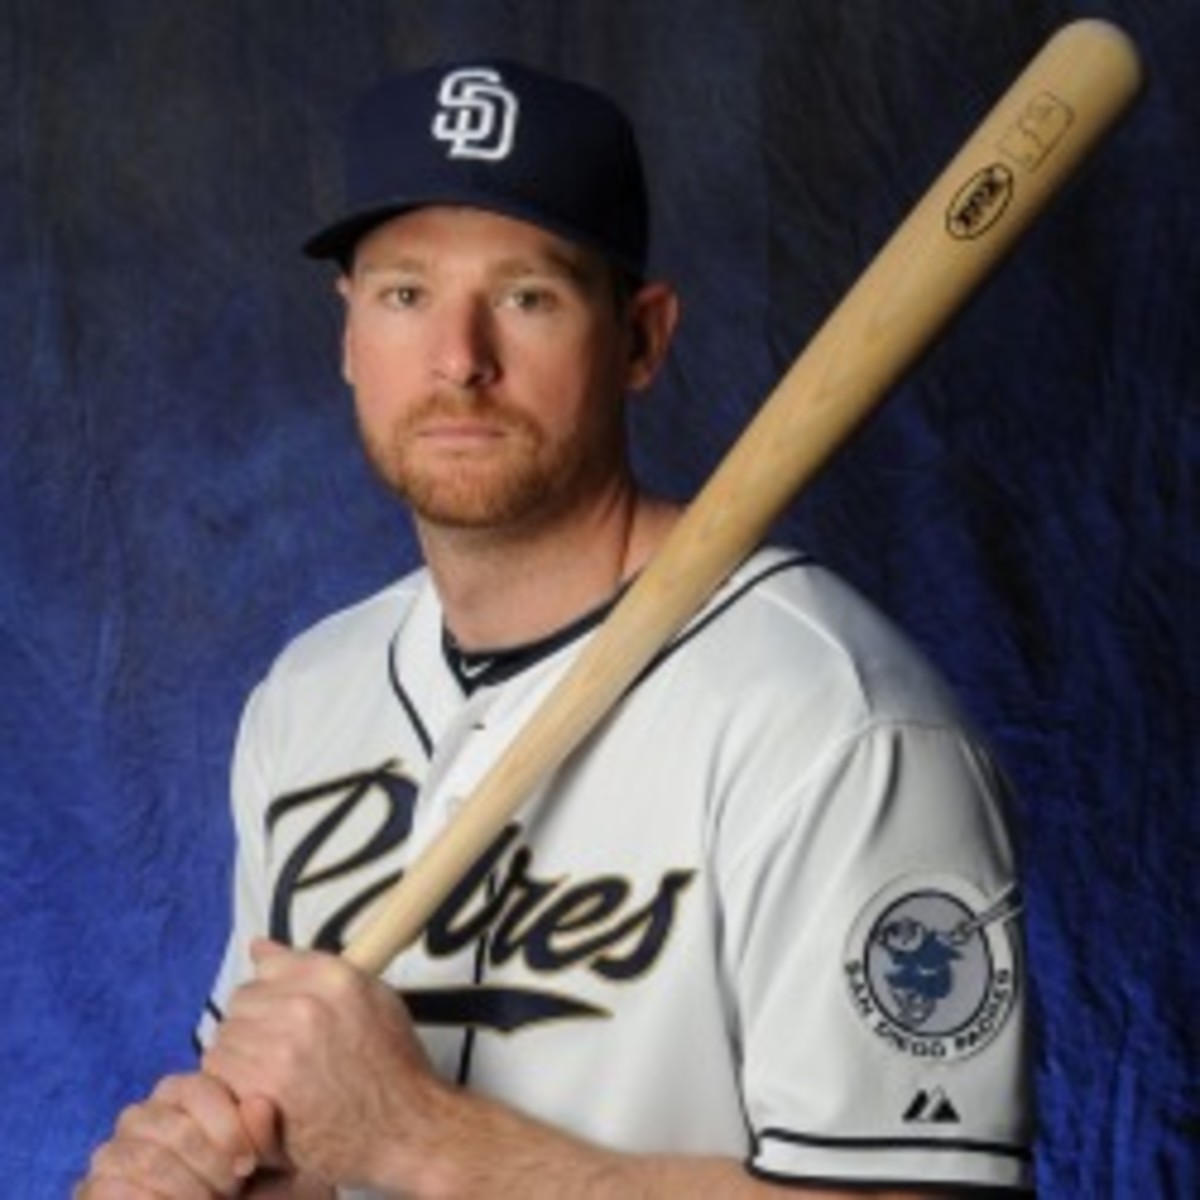 Chase Headley #7 of the San Diego Padres poses during MLB photo day February 18, 2013. (Photo by Rich Pilling/Getty Images)